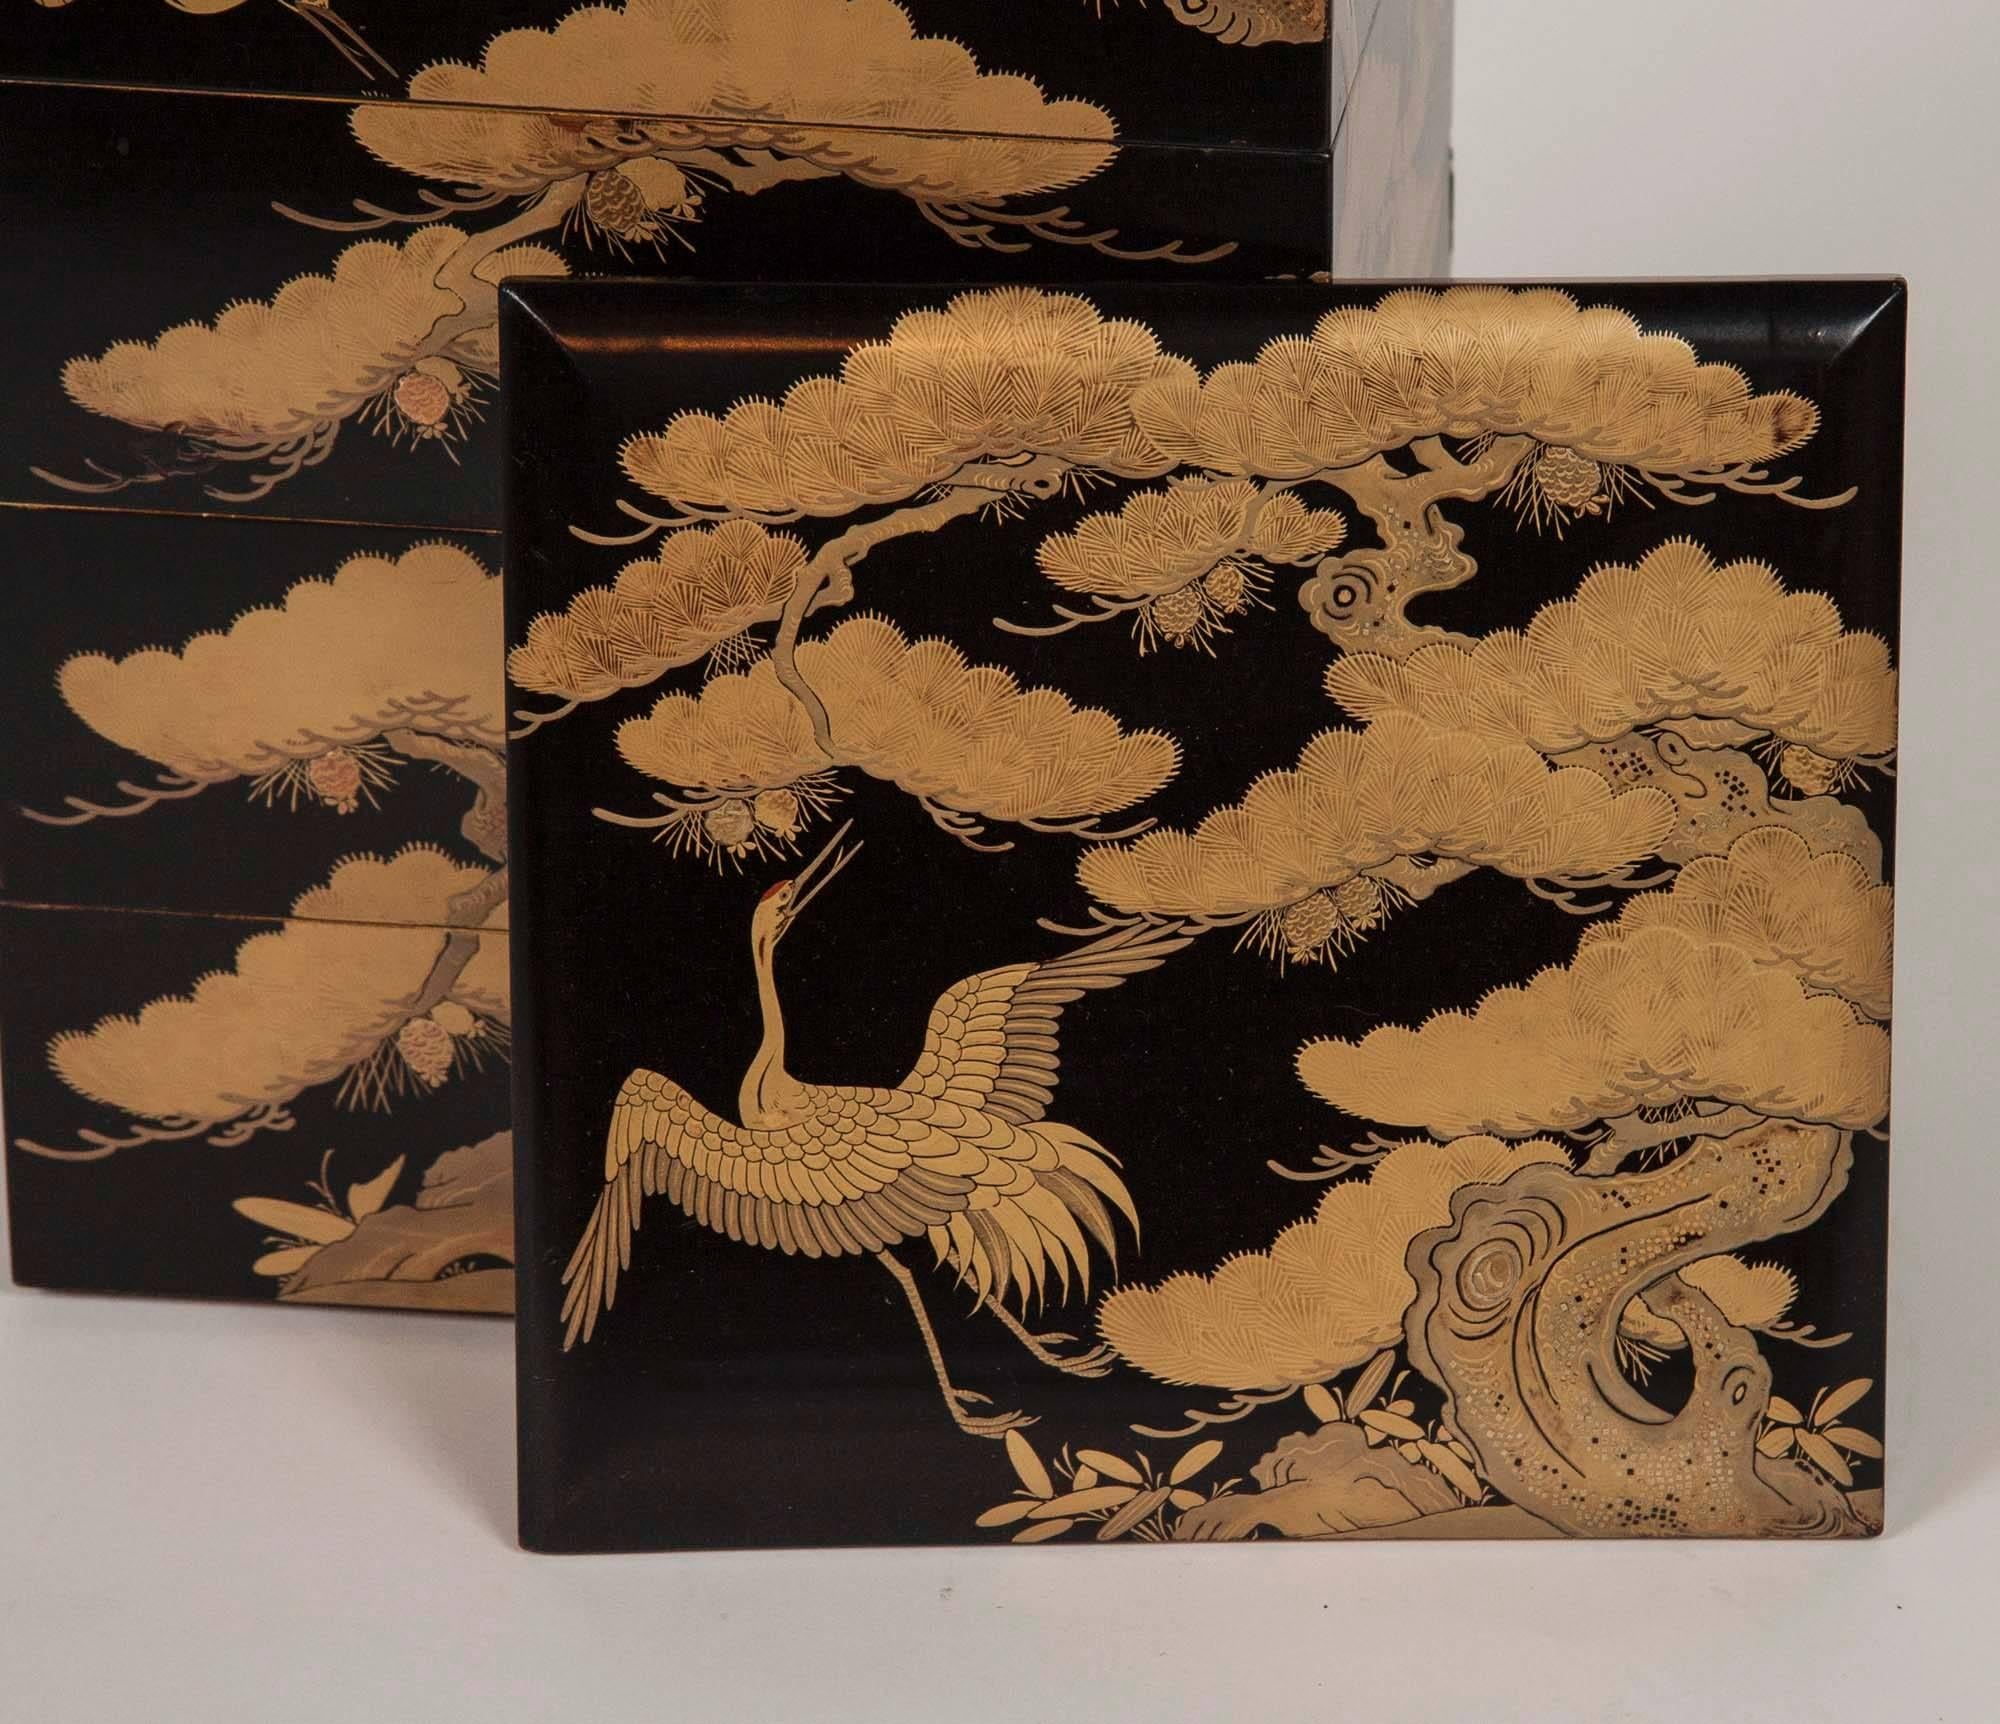 19th Century Japanese Black Lacquer Jubako Box with Stork Motif